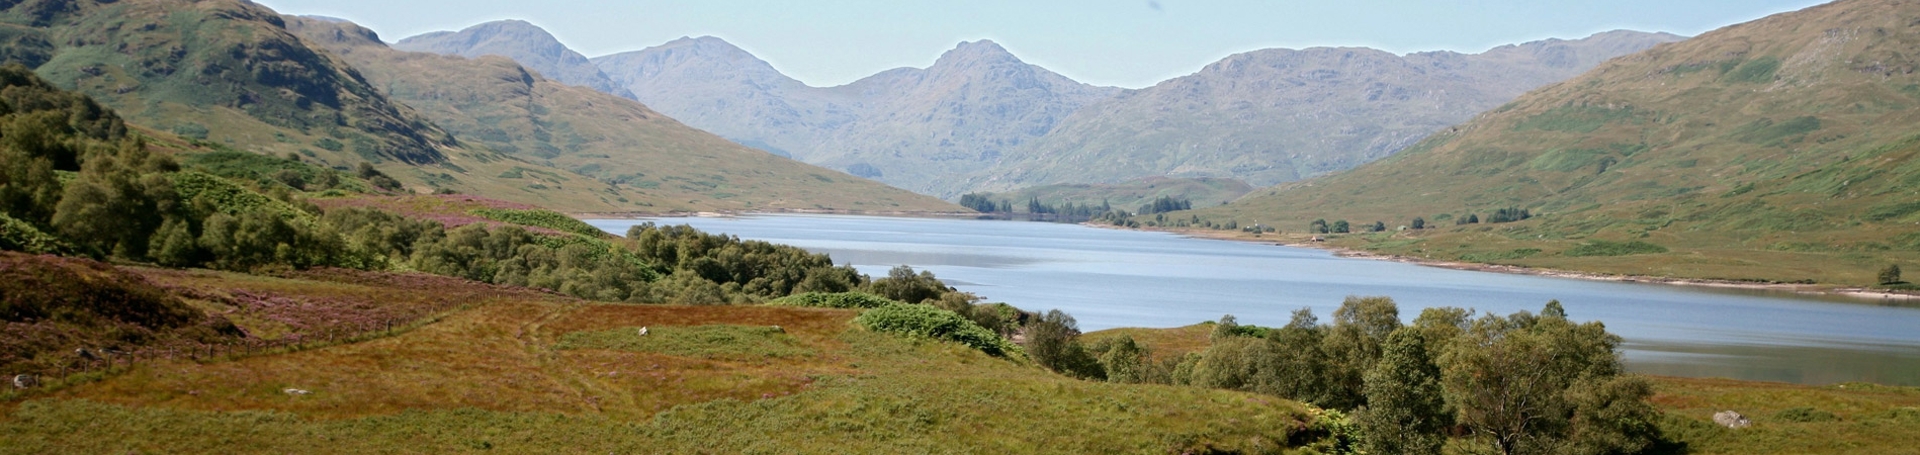 A glimspe of what scotland has to offer with its glorious mountains and lochs views. When you travel with lochs and Glens Holidays.